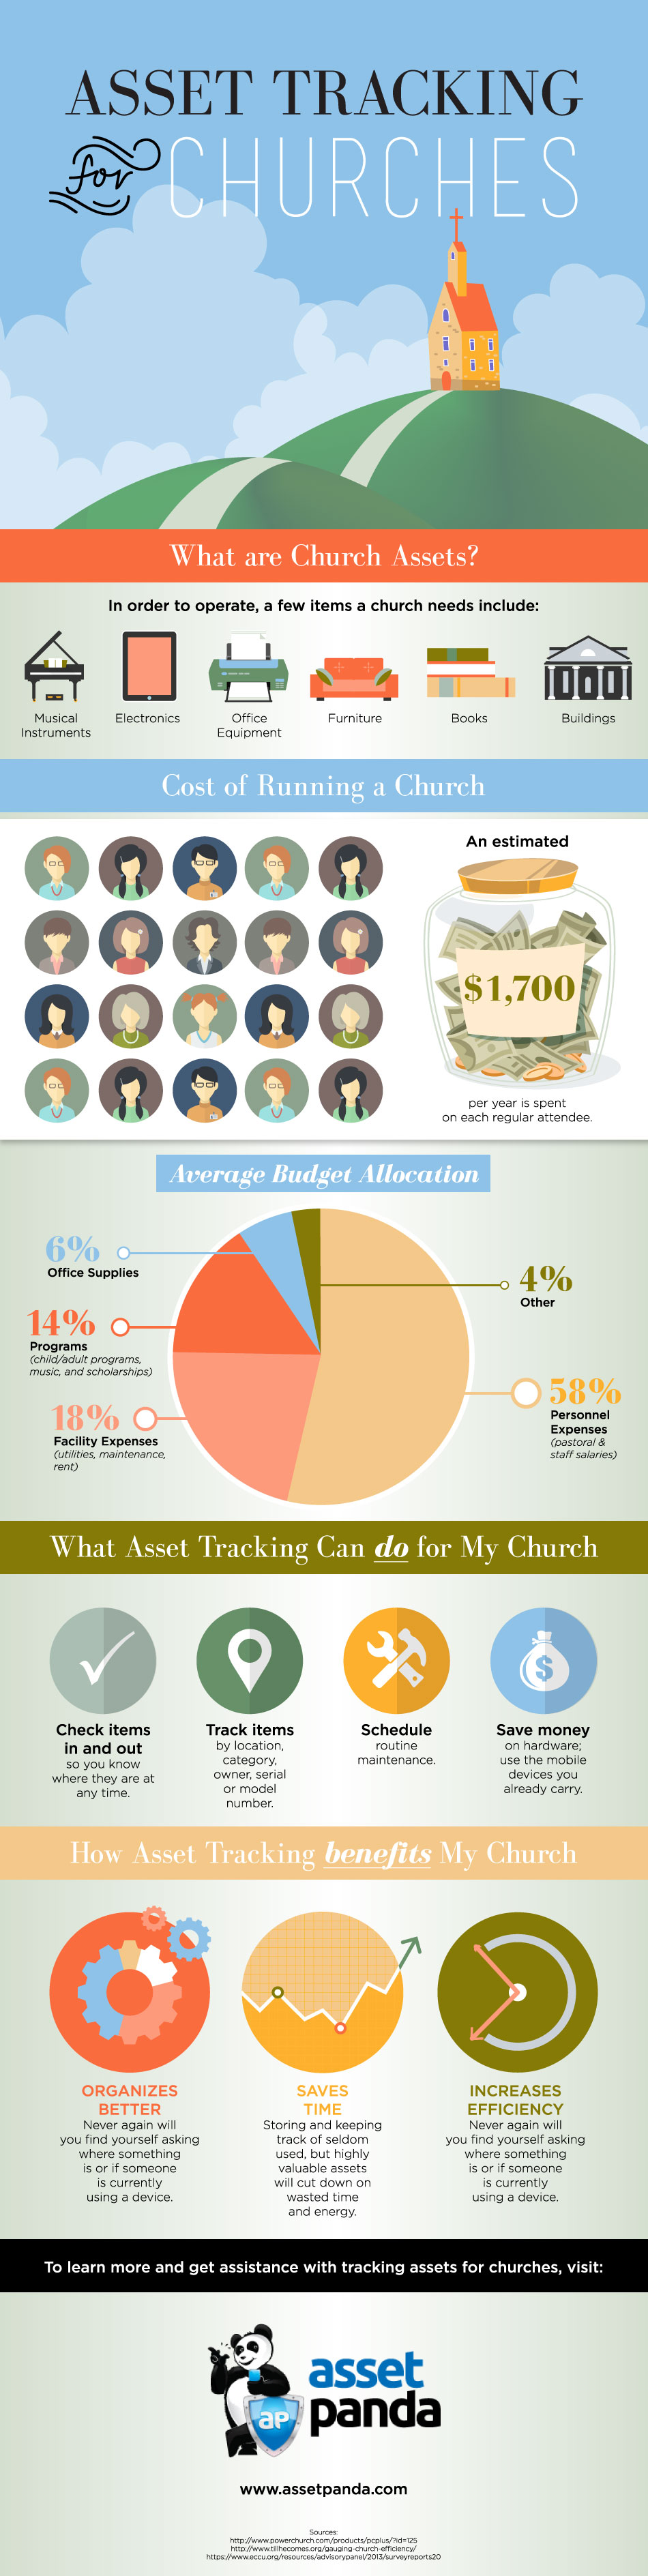 Asset Tracking For Churches